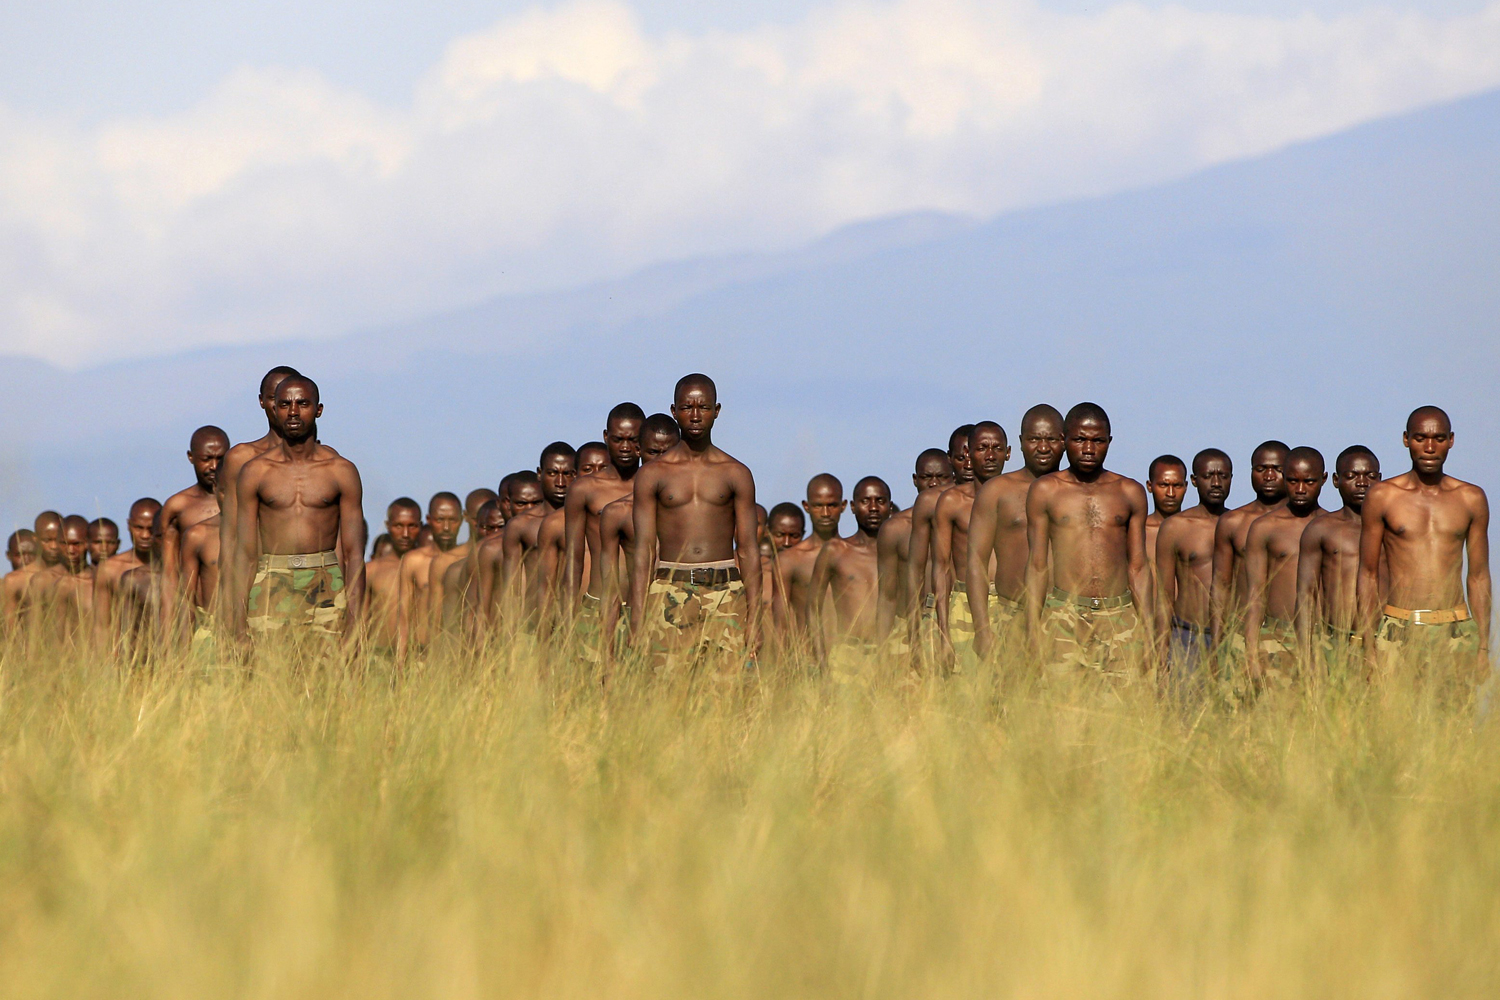 M23 rebel recruits stand at attention during a training session in eastern Democratic Republic of Congo